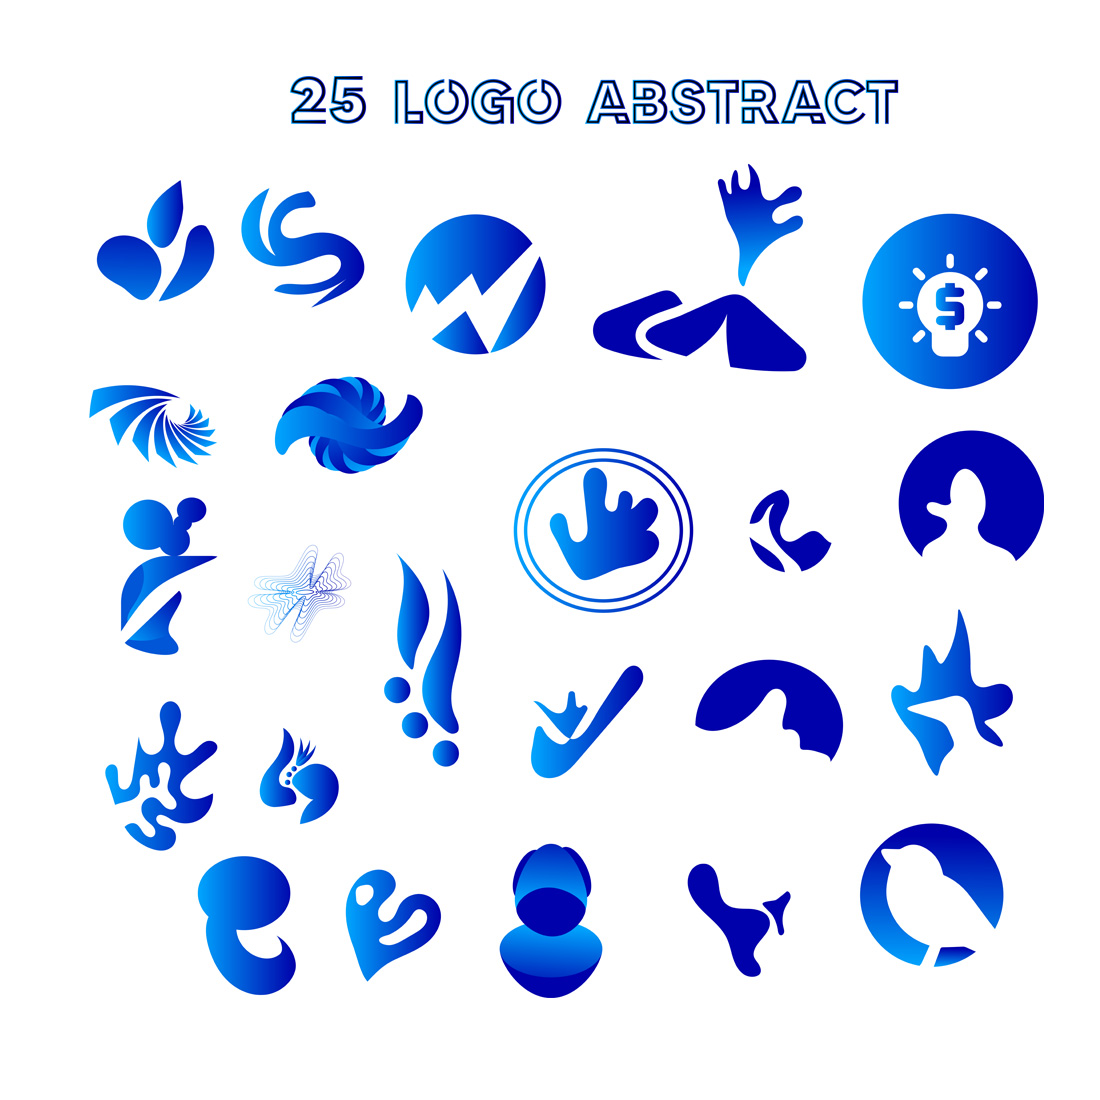 25 abstract logos in gradient blue cover image.